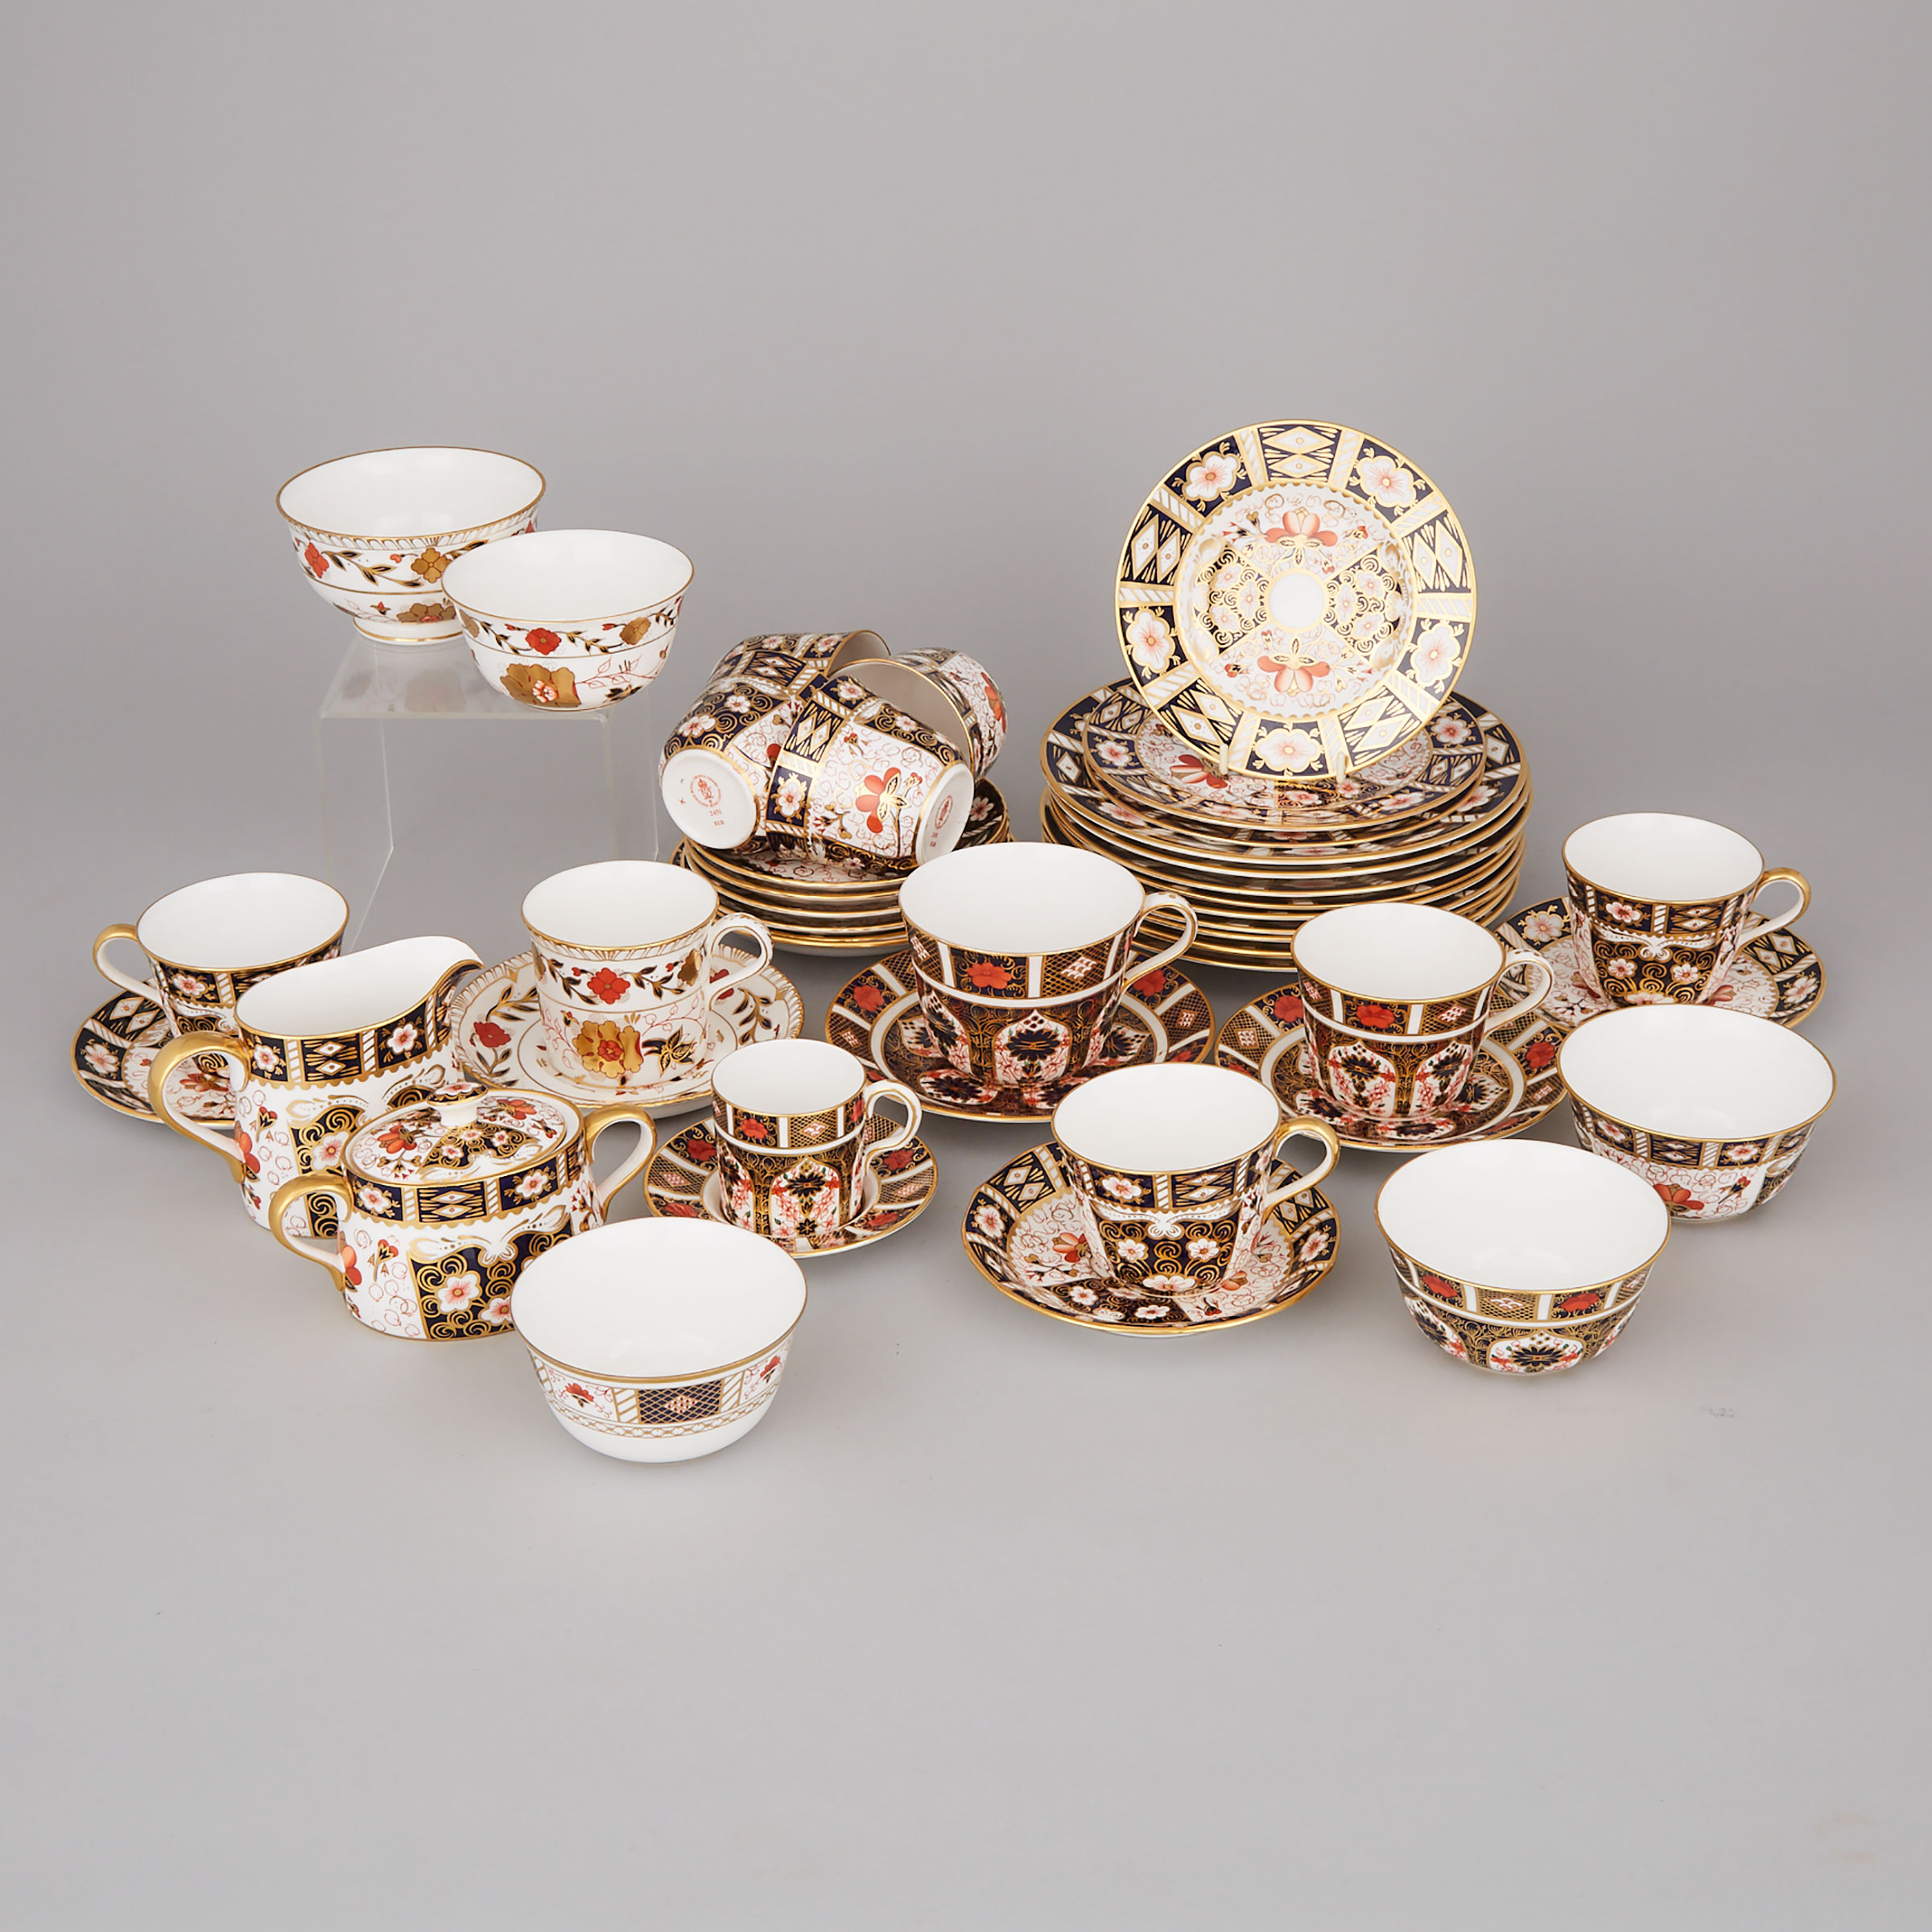 Group of Royal Crown Derby ‘Imari’ (2451), ‘Old Imari’ (1128) and Other (A962, 8687 and A1253) Pattern Tablewares, 20th century